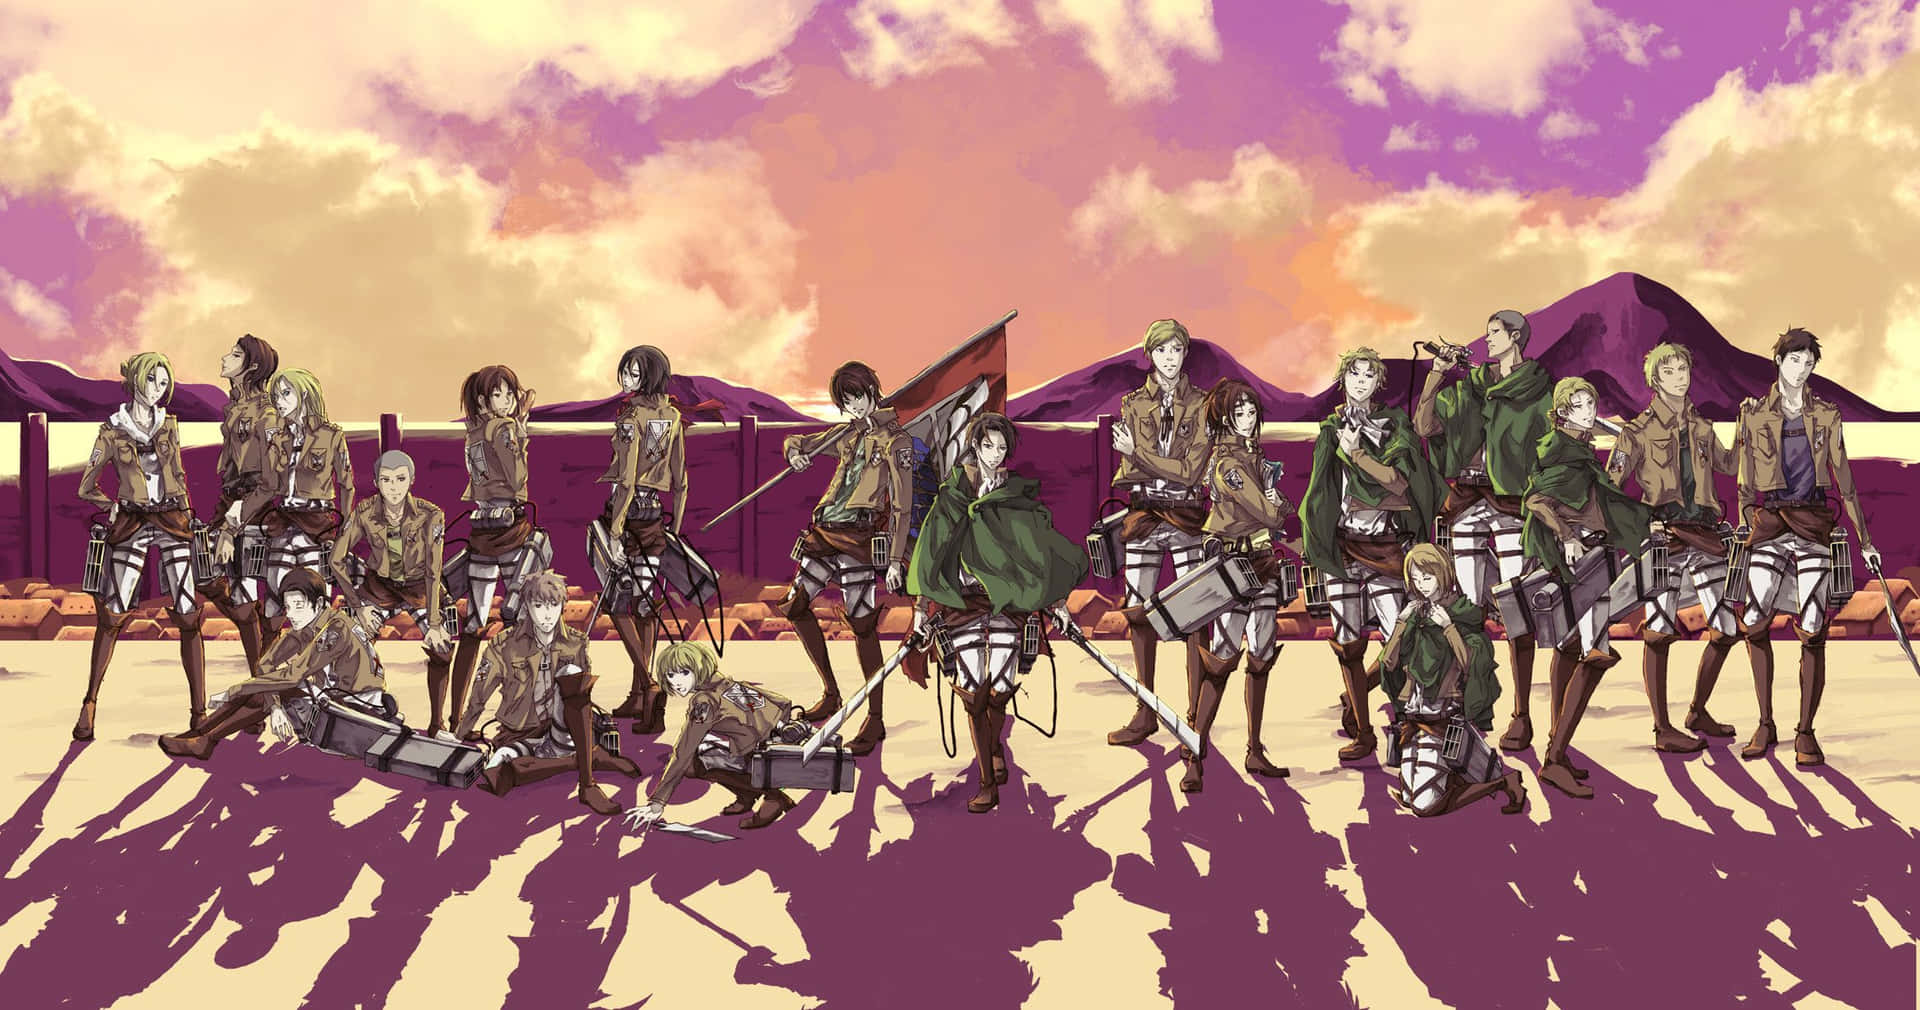 Attackon Titan Characters Sunset Background